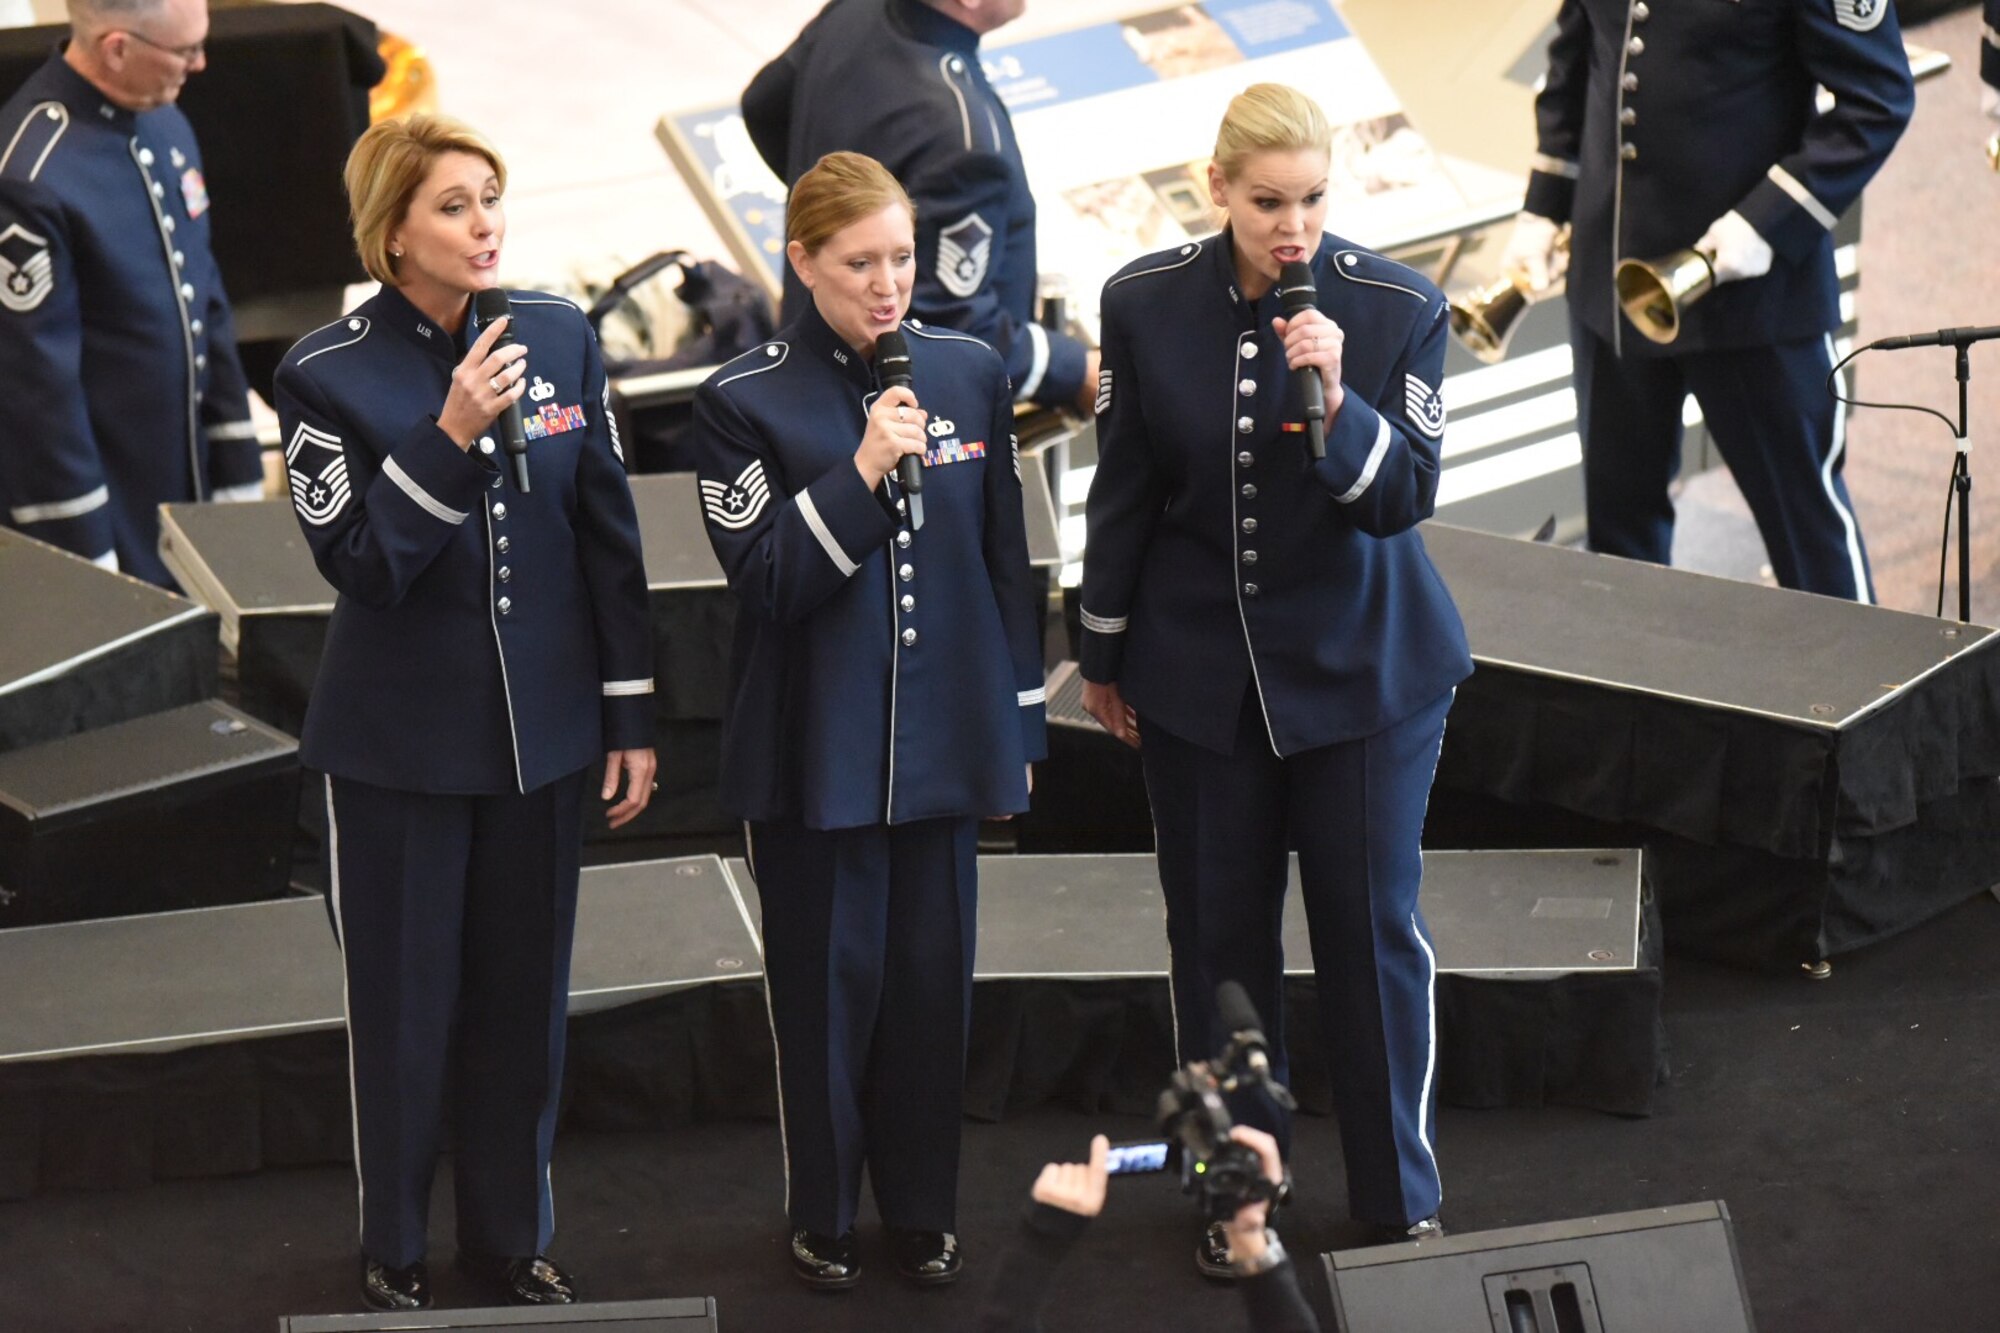 U.S. Air Force Band Commander Col. Larry H. Lang conducts the band's annual holiday flash mob performance at the Smithsonian National Air and Space Museum in Washington, D.C., Nov. 29, 2016. (U.S. Navy photo by JBAB/PA)